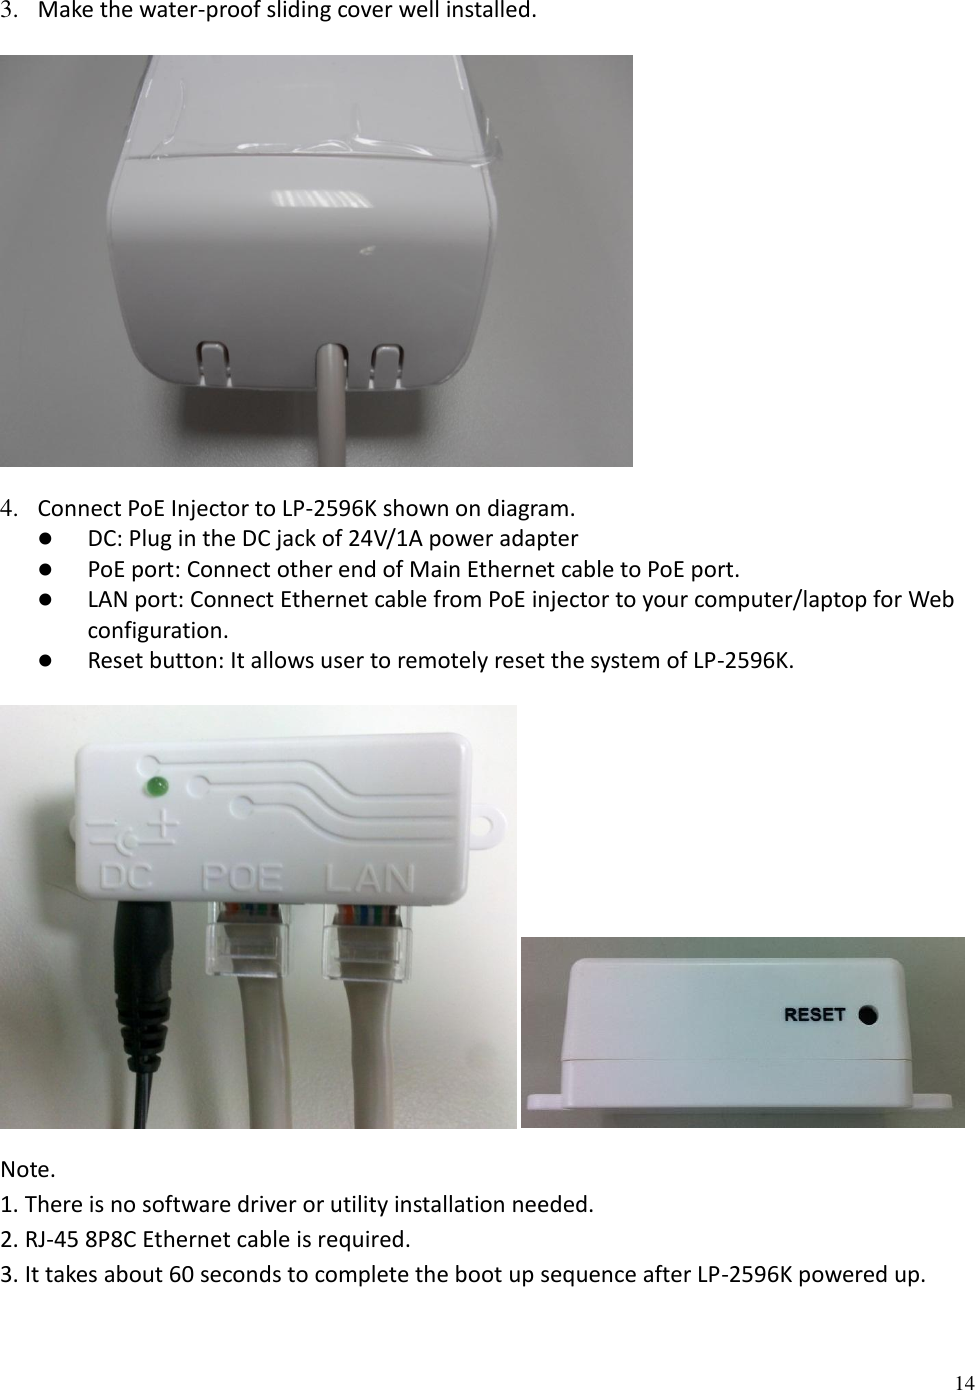 14  3. Make the water-proof sliding cover well installed.   4. Connect PoE Injector to LP-2596K shown on diagram.  DC: Plug in the DC jack of 24V/1A power adapter  PoE port: Connect other end of Main Ethernet cable to PoE port.  LAN port: Connect Ethernet cable from PoE injector to your computer/laptop for Web configuration.  Reset button: It allows user to remotely reset the system of LP-2596K.    Note.  1. There is no software driver or utility installation needed. 2. RJ-45 8P8C Ethernet cable is required. 3. It takes about 60 seconds to complete the boot up sequence after LP-2596K powered up.  